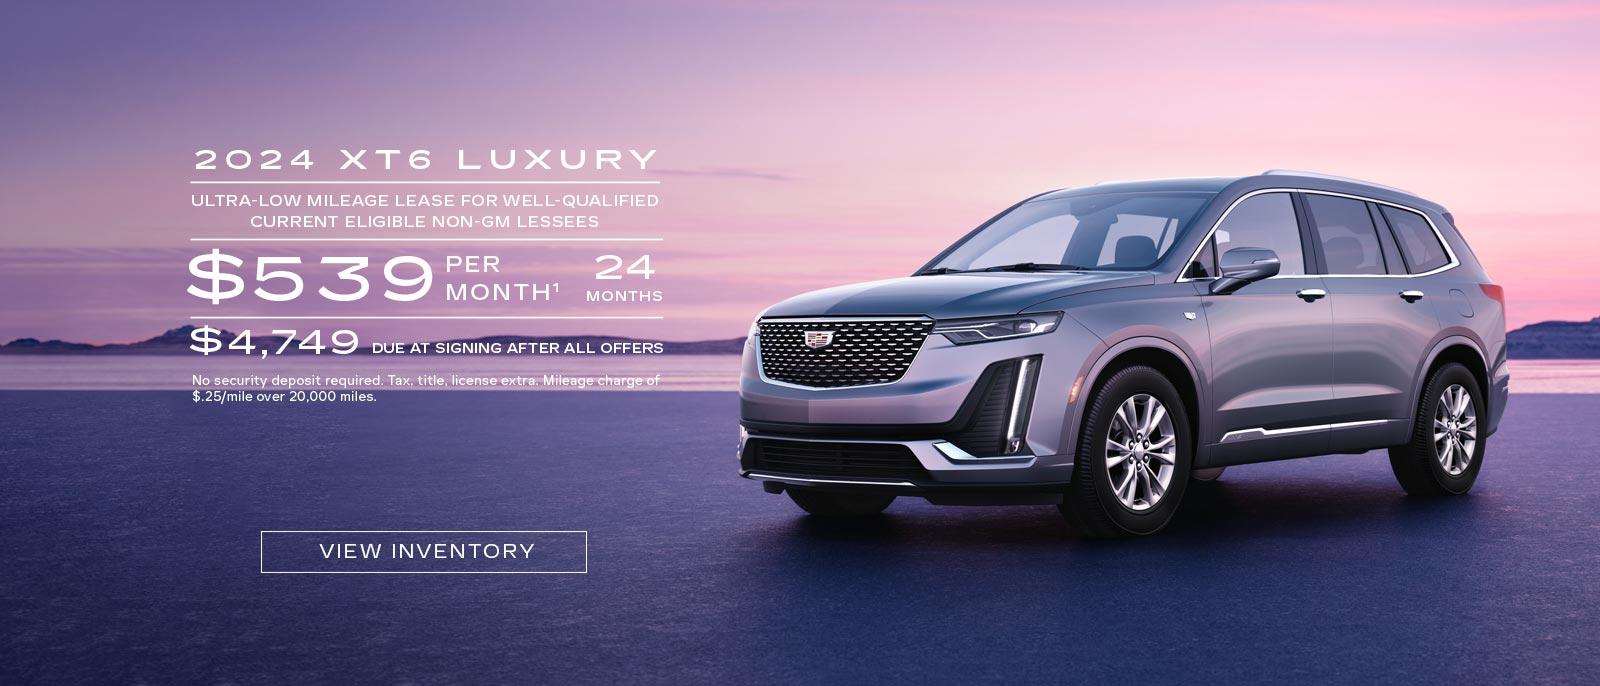 2024 XT6 Luxury. Ultra-low mileage lease for well-qualified current eligible Non-GM Lessees. $539 per month. 24 months. $4,749 due at signing after all offers.